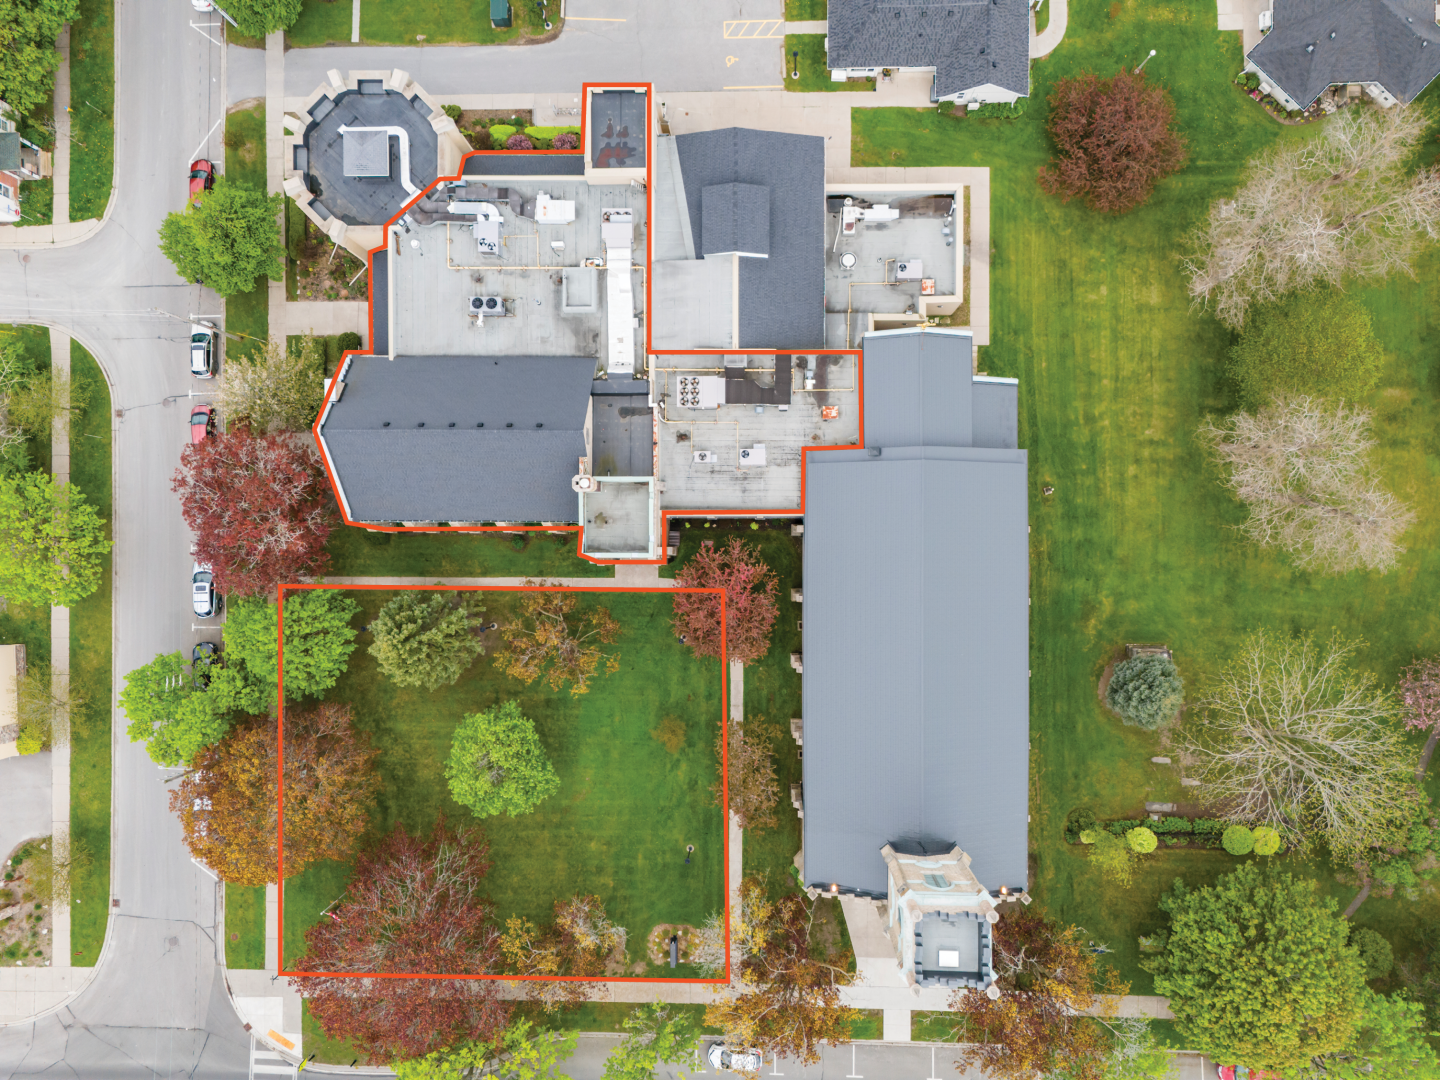 240 College Street whole building aerial view with outdoor space